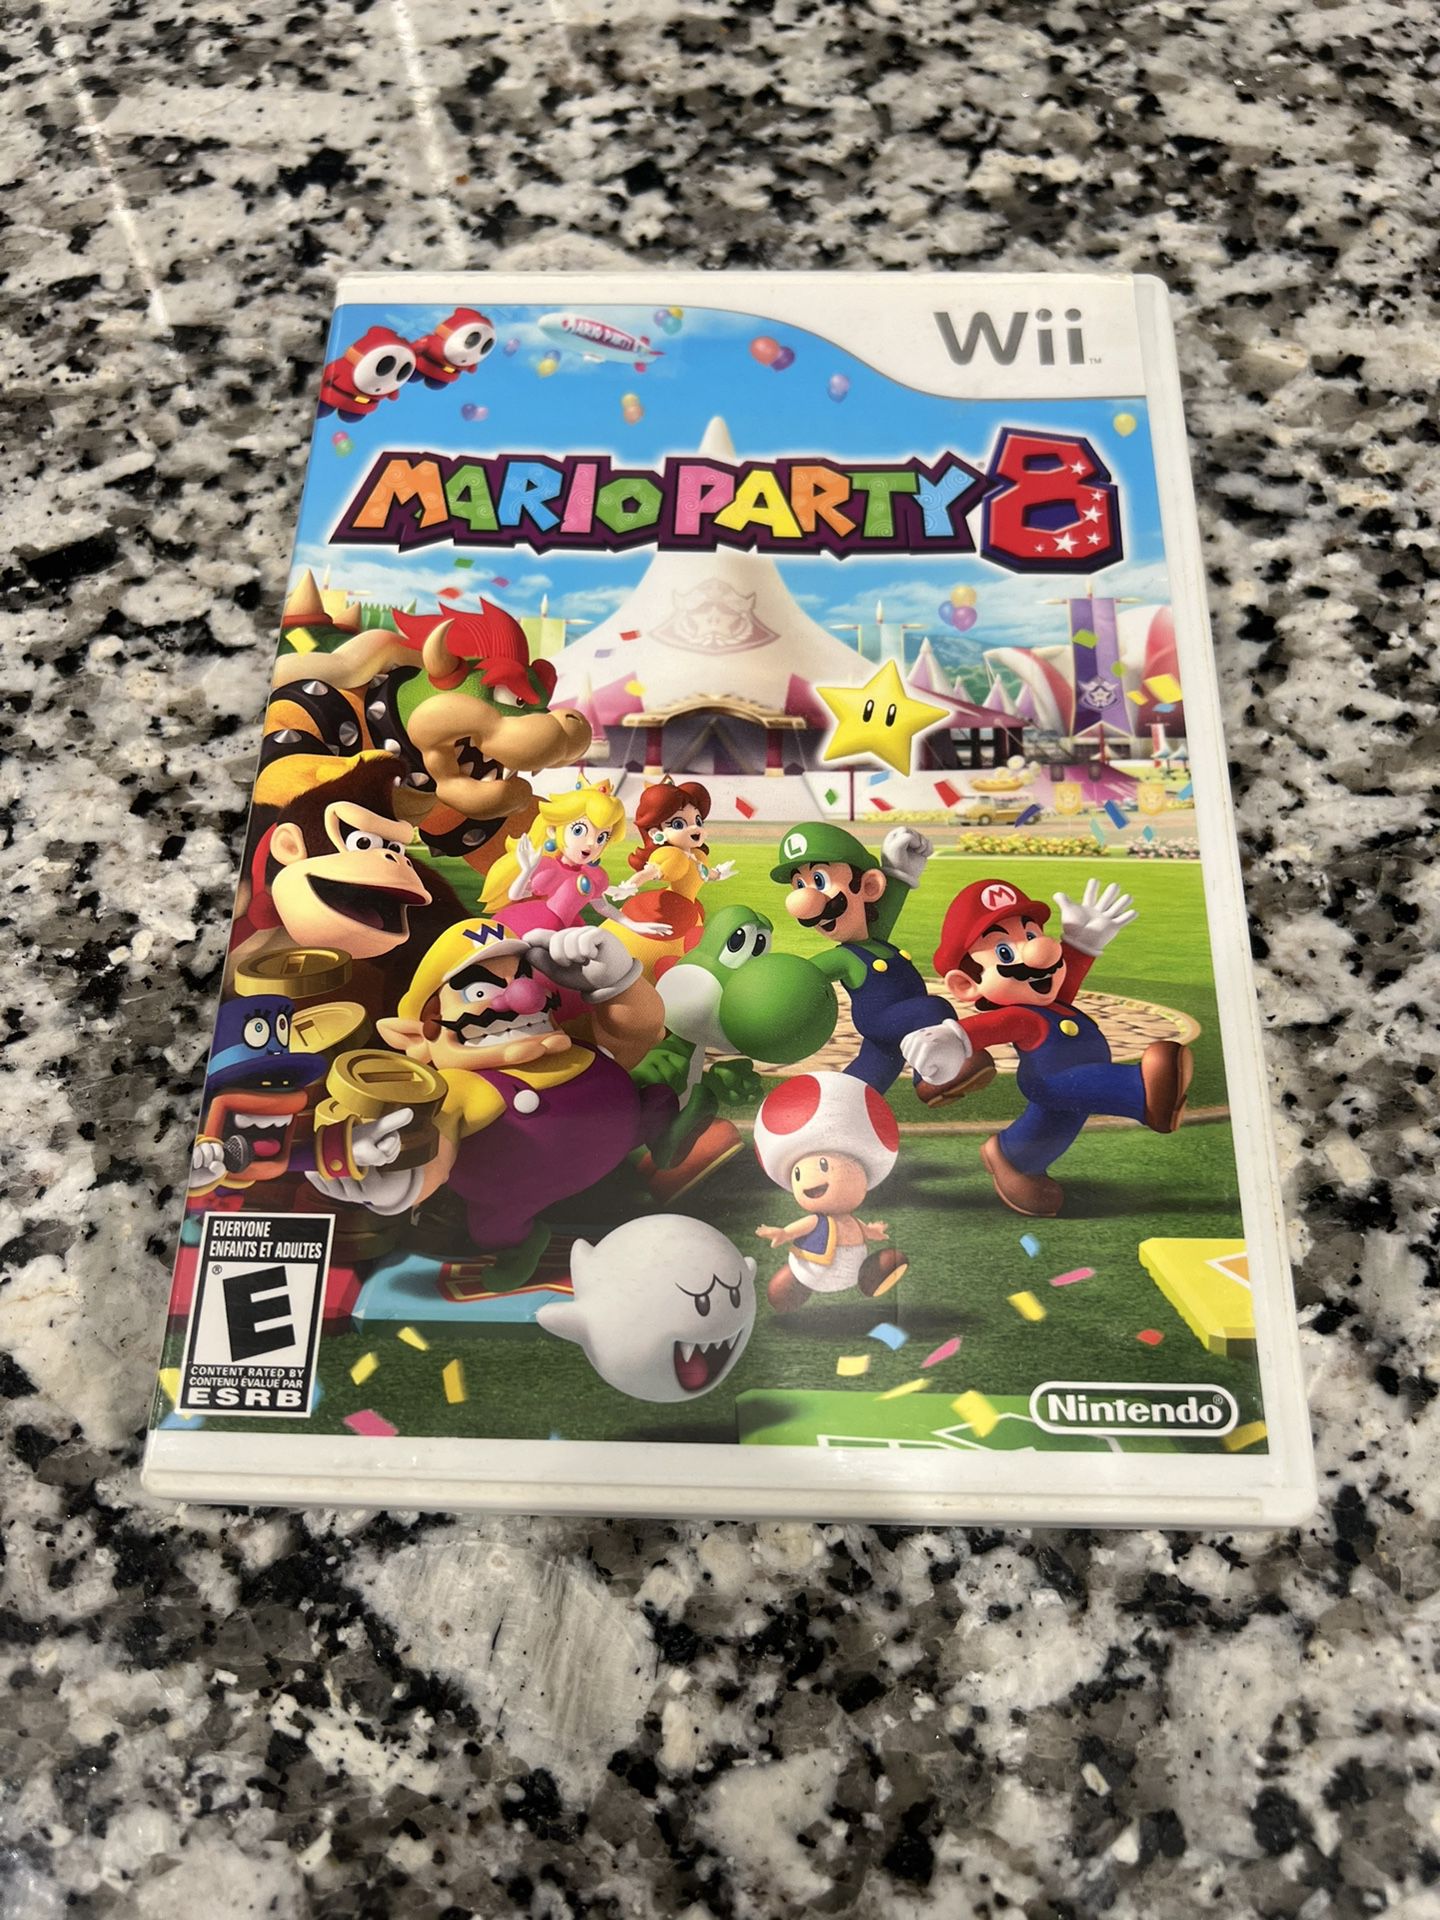 Selling Mario Party 8 for Nintendo Wii